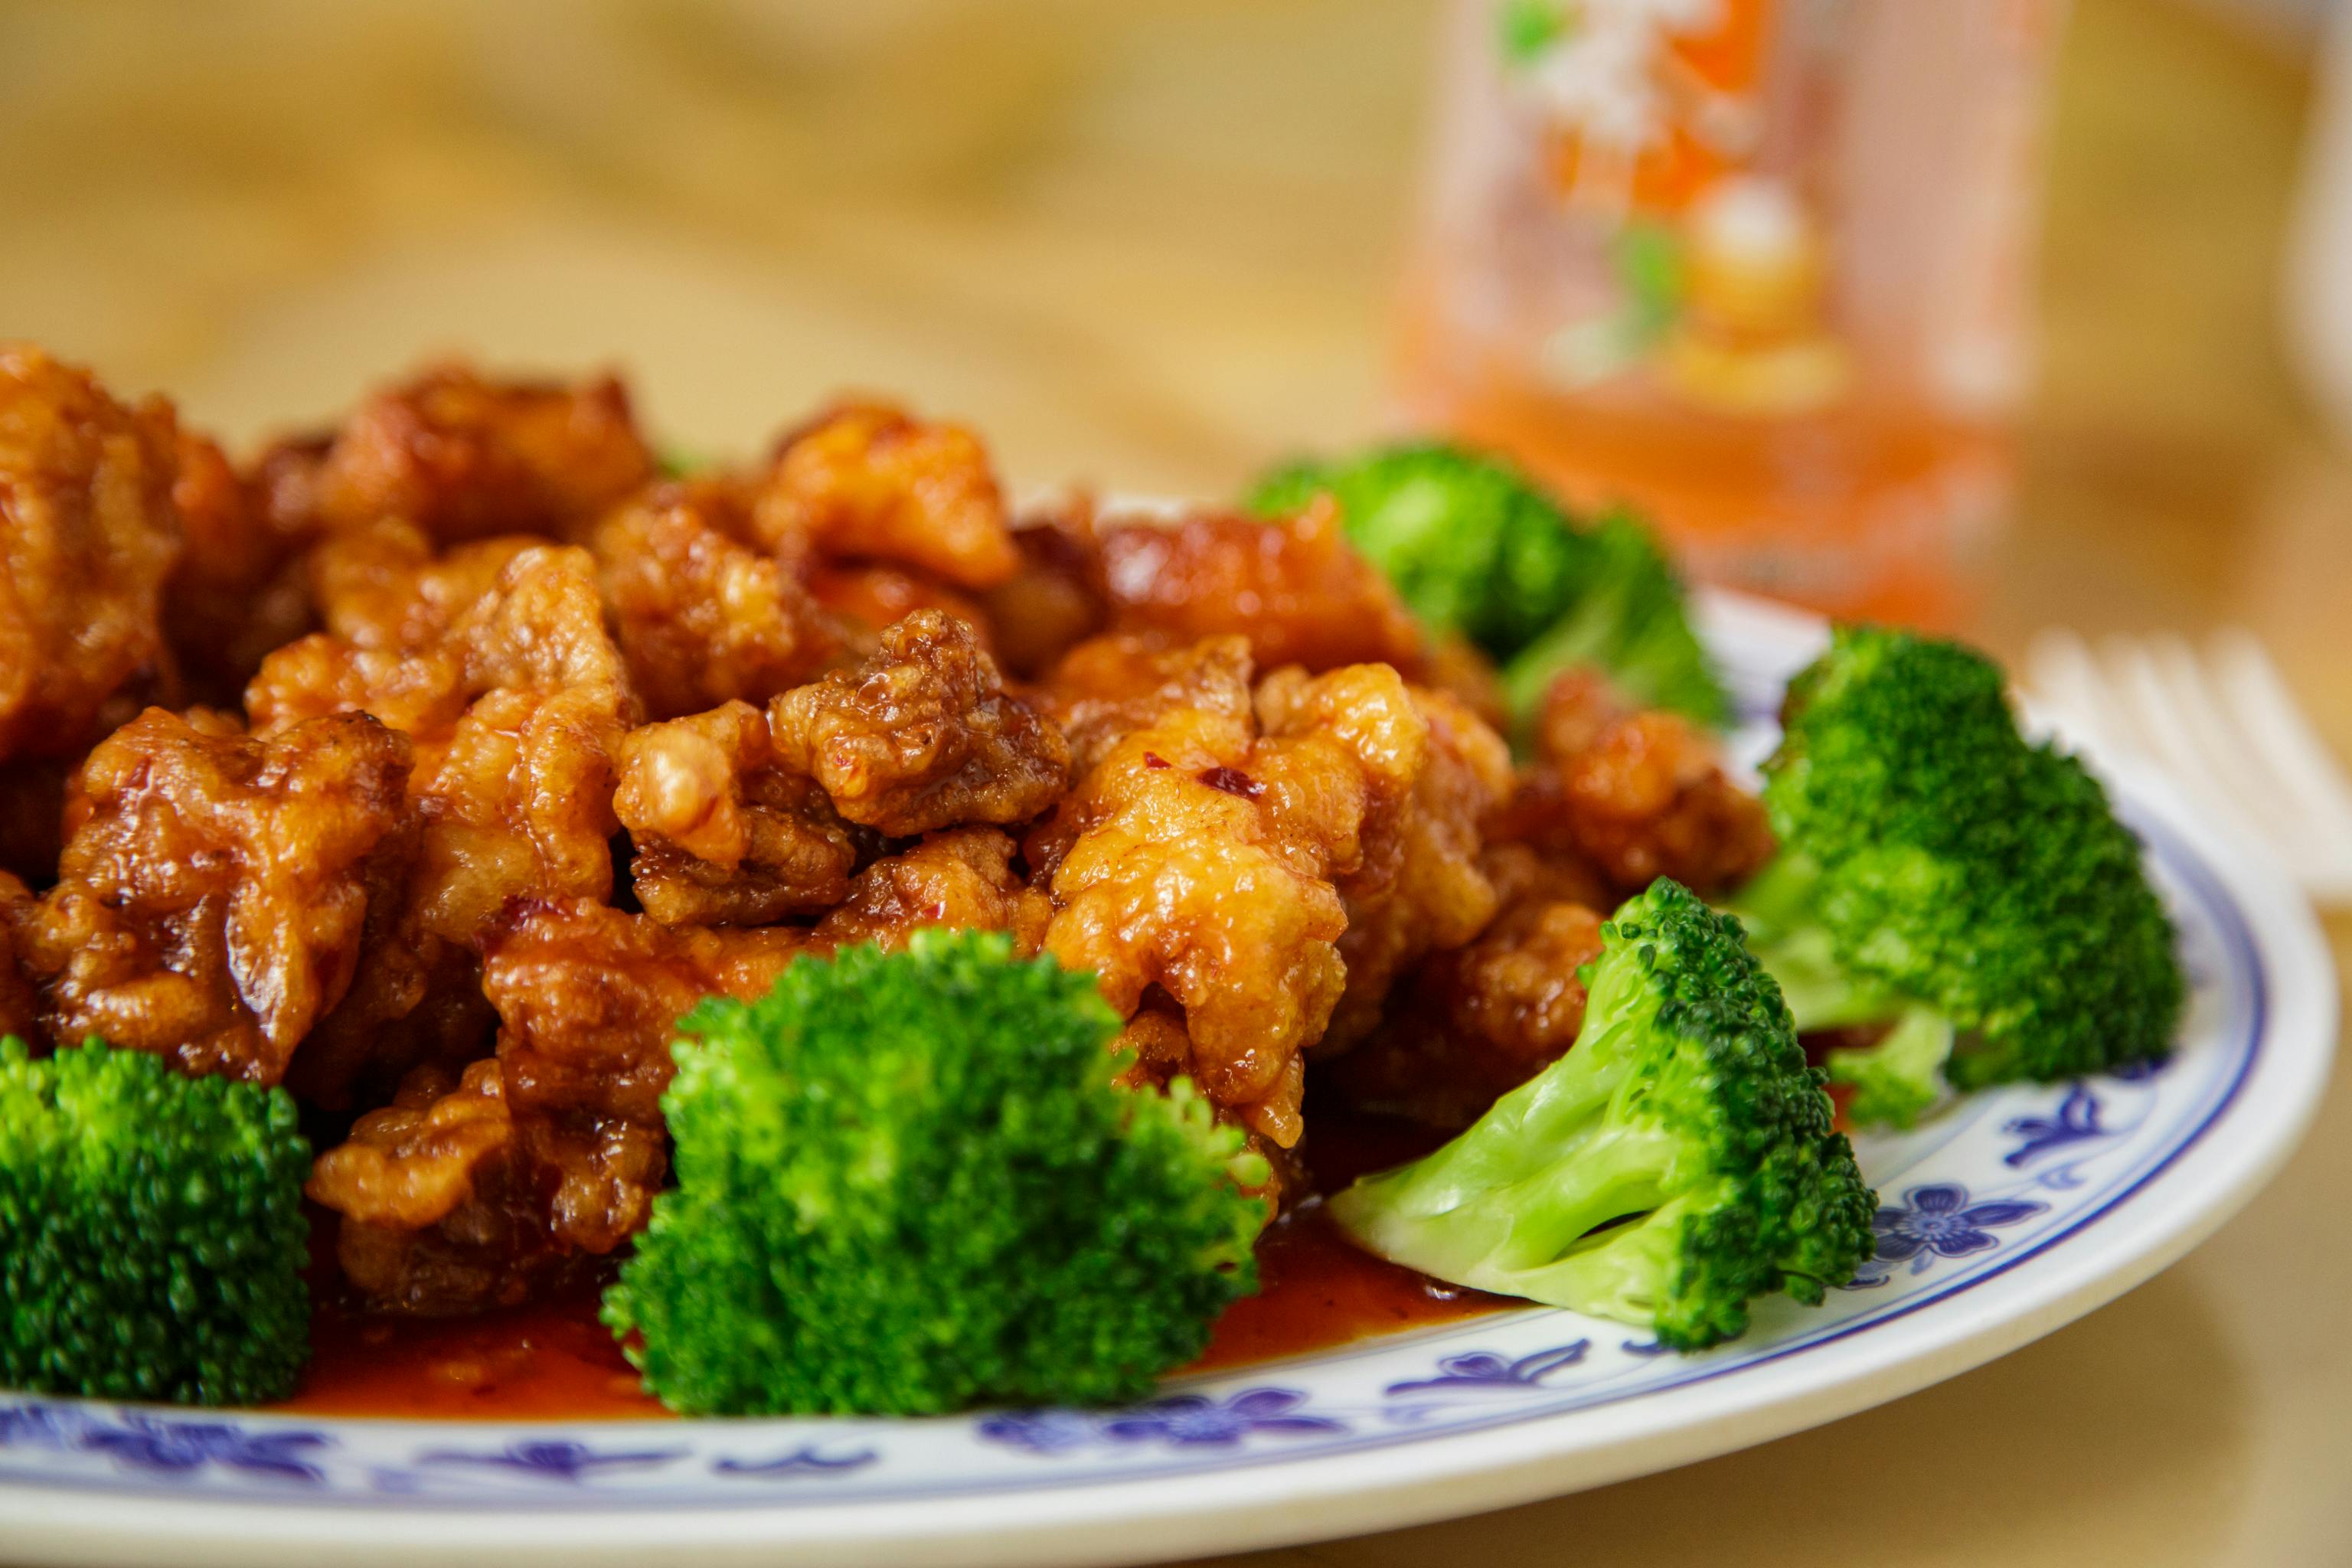 A1. General Tso's Chicken from A8 China in Madison, WI